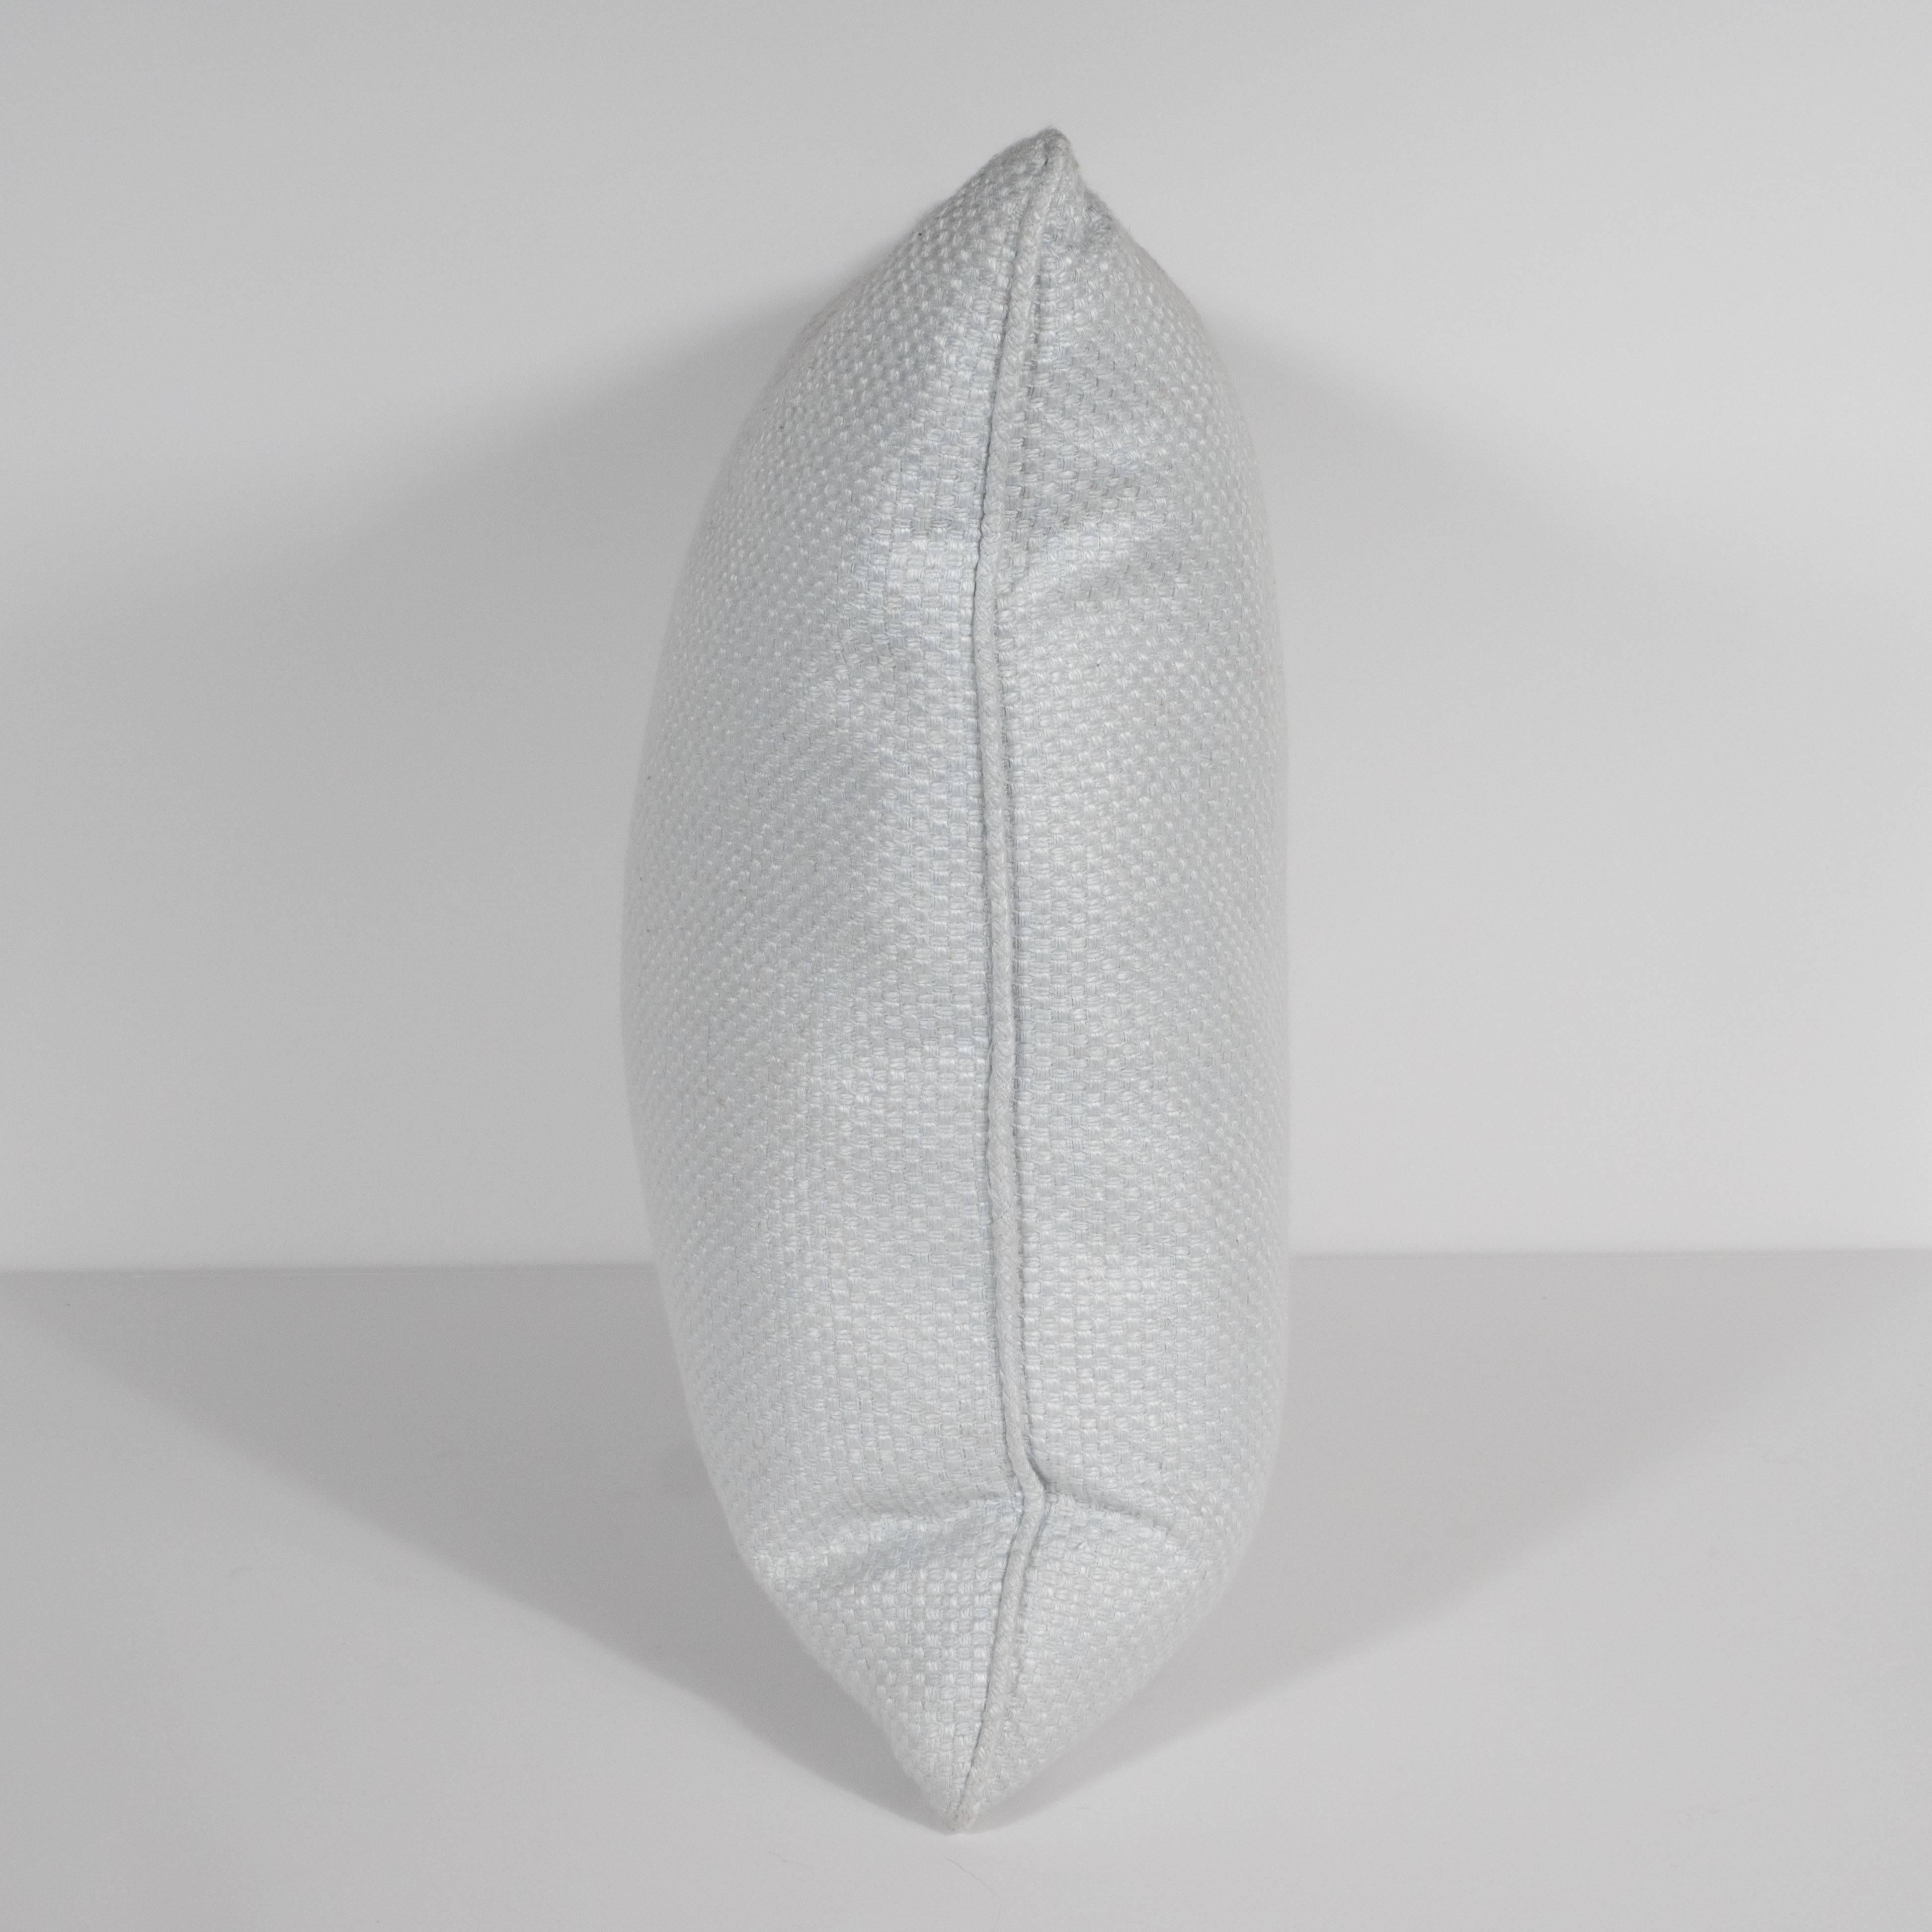 This gorgeous pair of pillows has been fabricated, in the United States, from luxurious white gold silk sourced from Il Bel Paese, Italy. They offer a subtle geometric pattern featuring contrasting horizontal and vertical grains, as well as piping